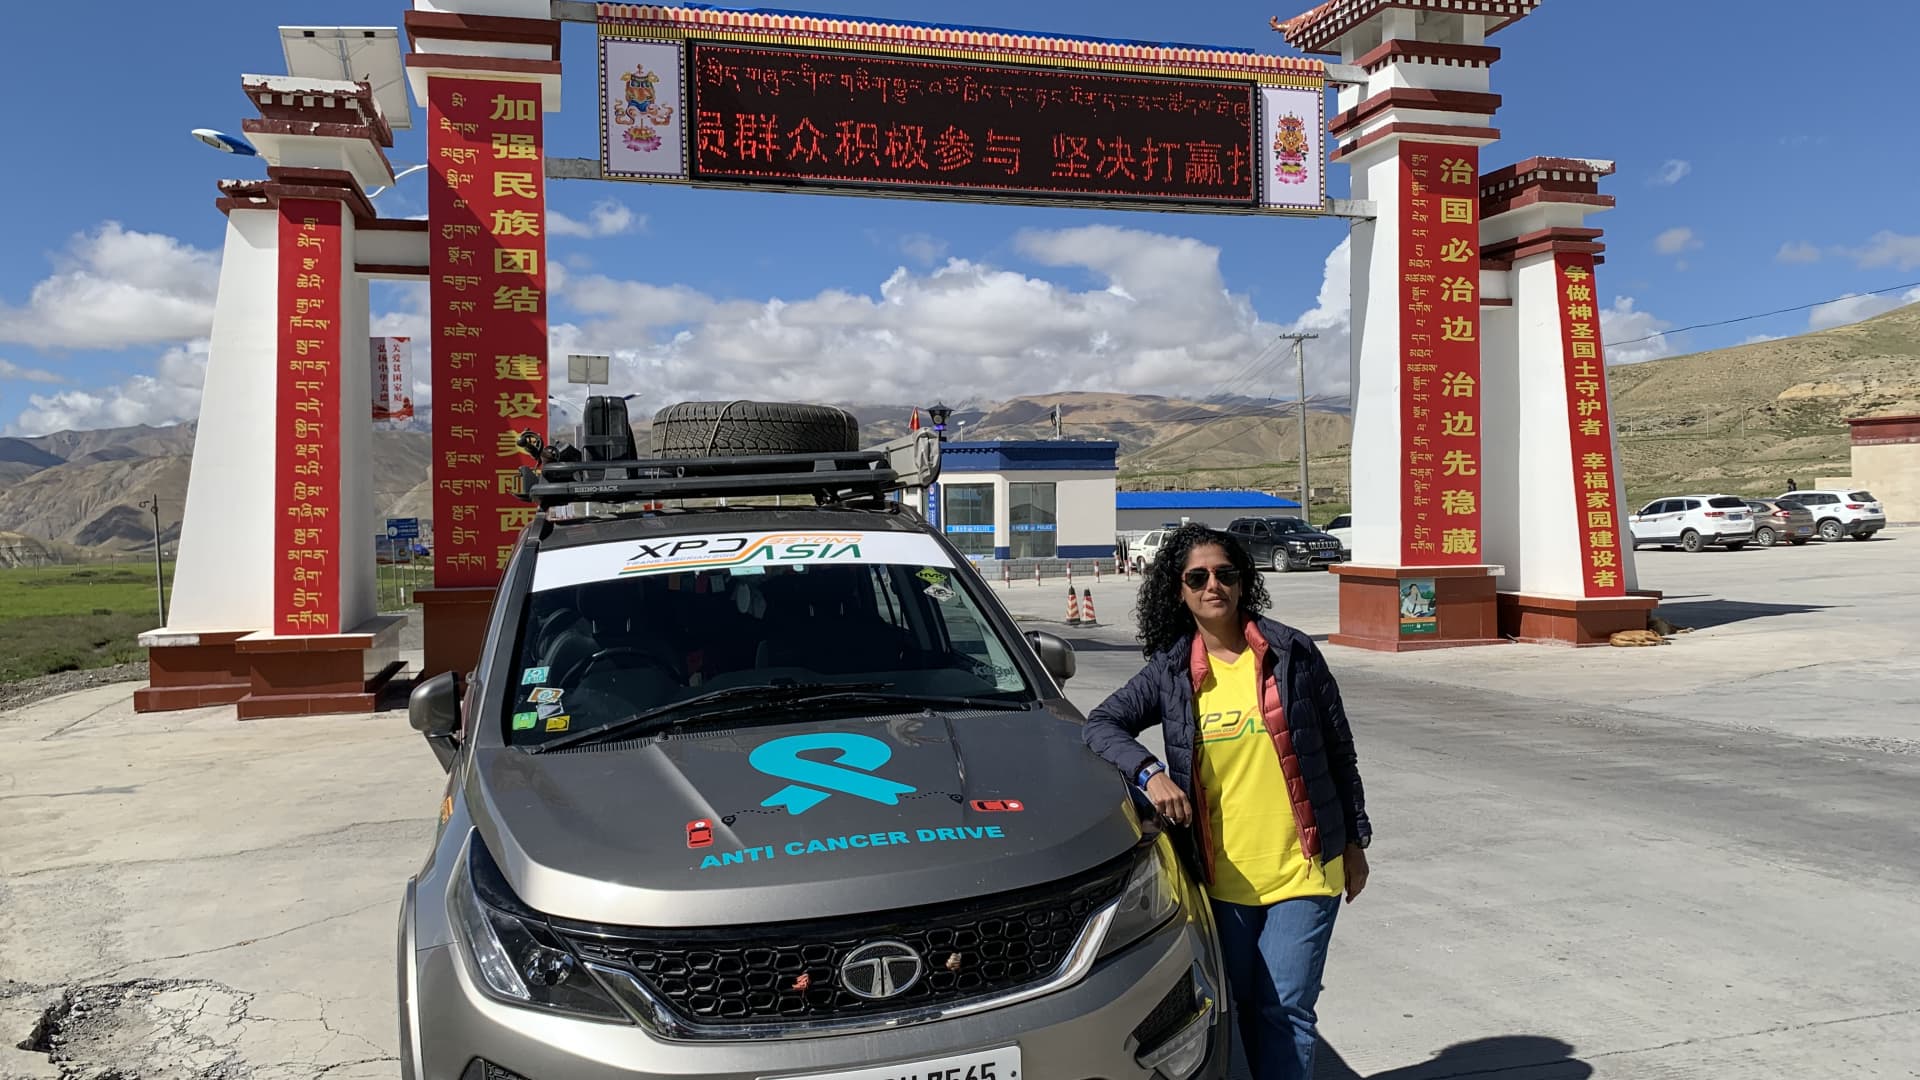 Meenakshi Sai, on a road trip from India to Russia to spread awareness about cervical cancer.